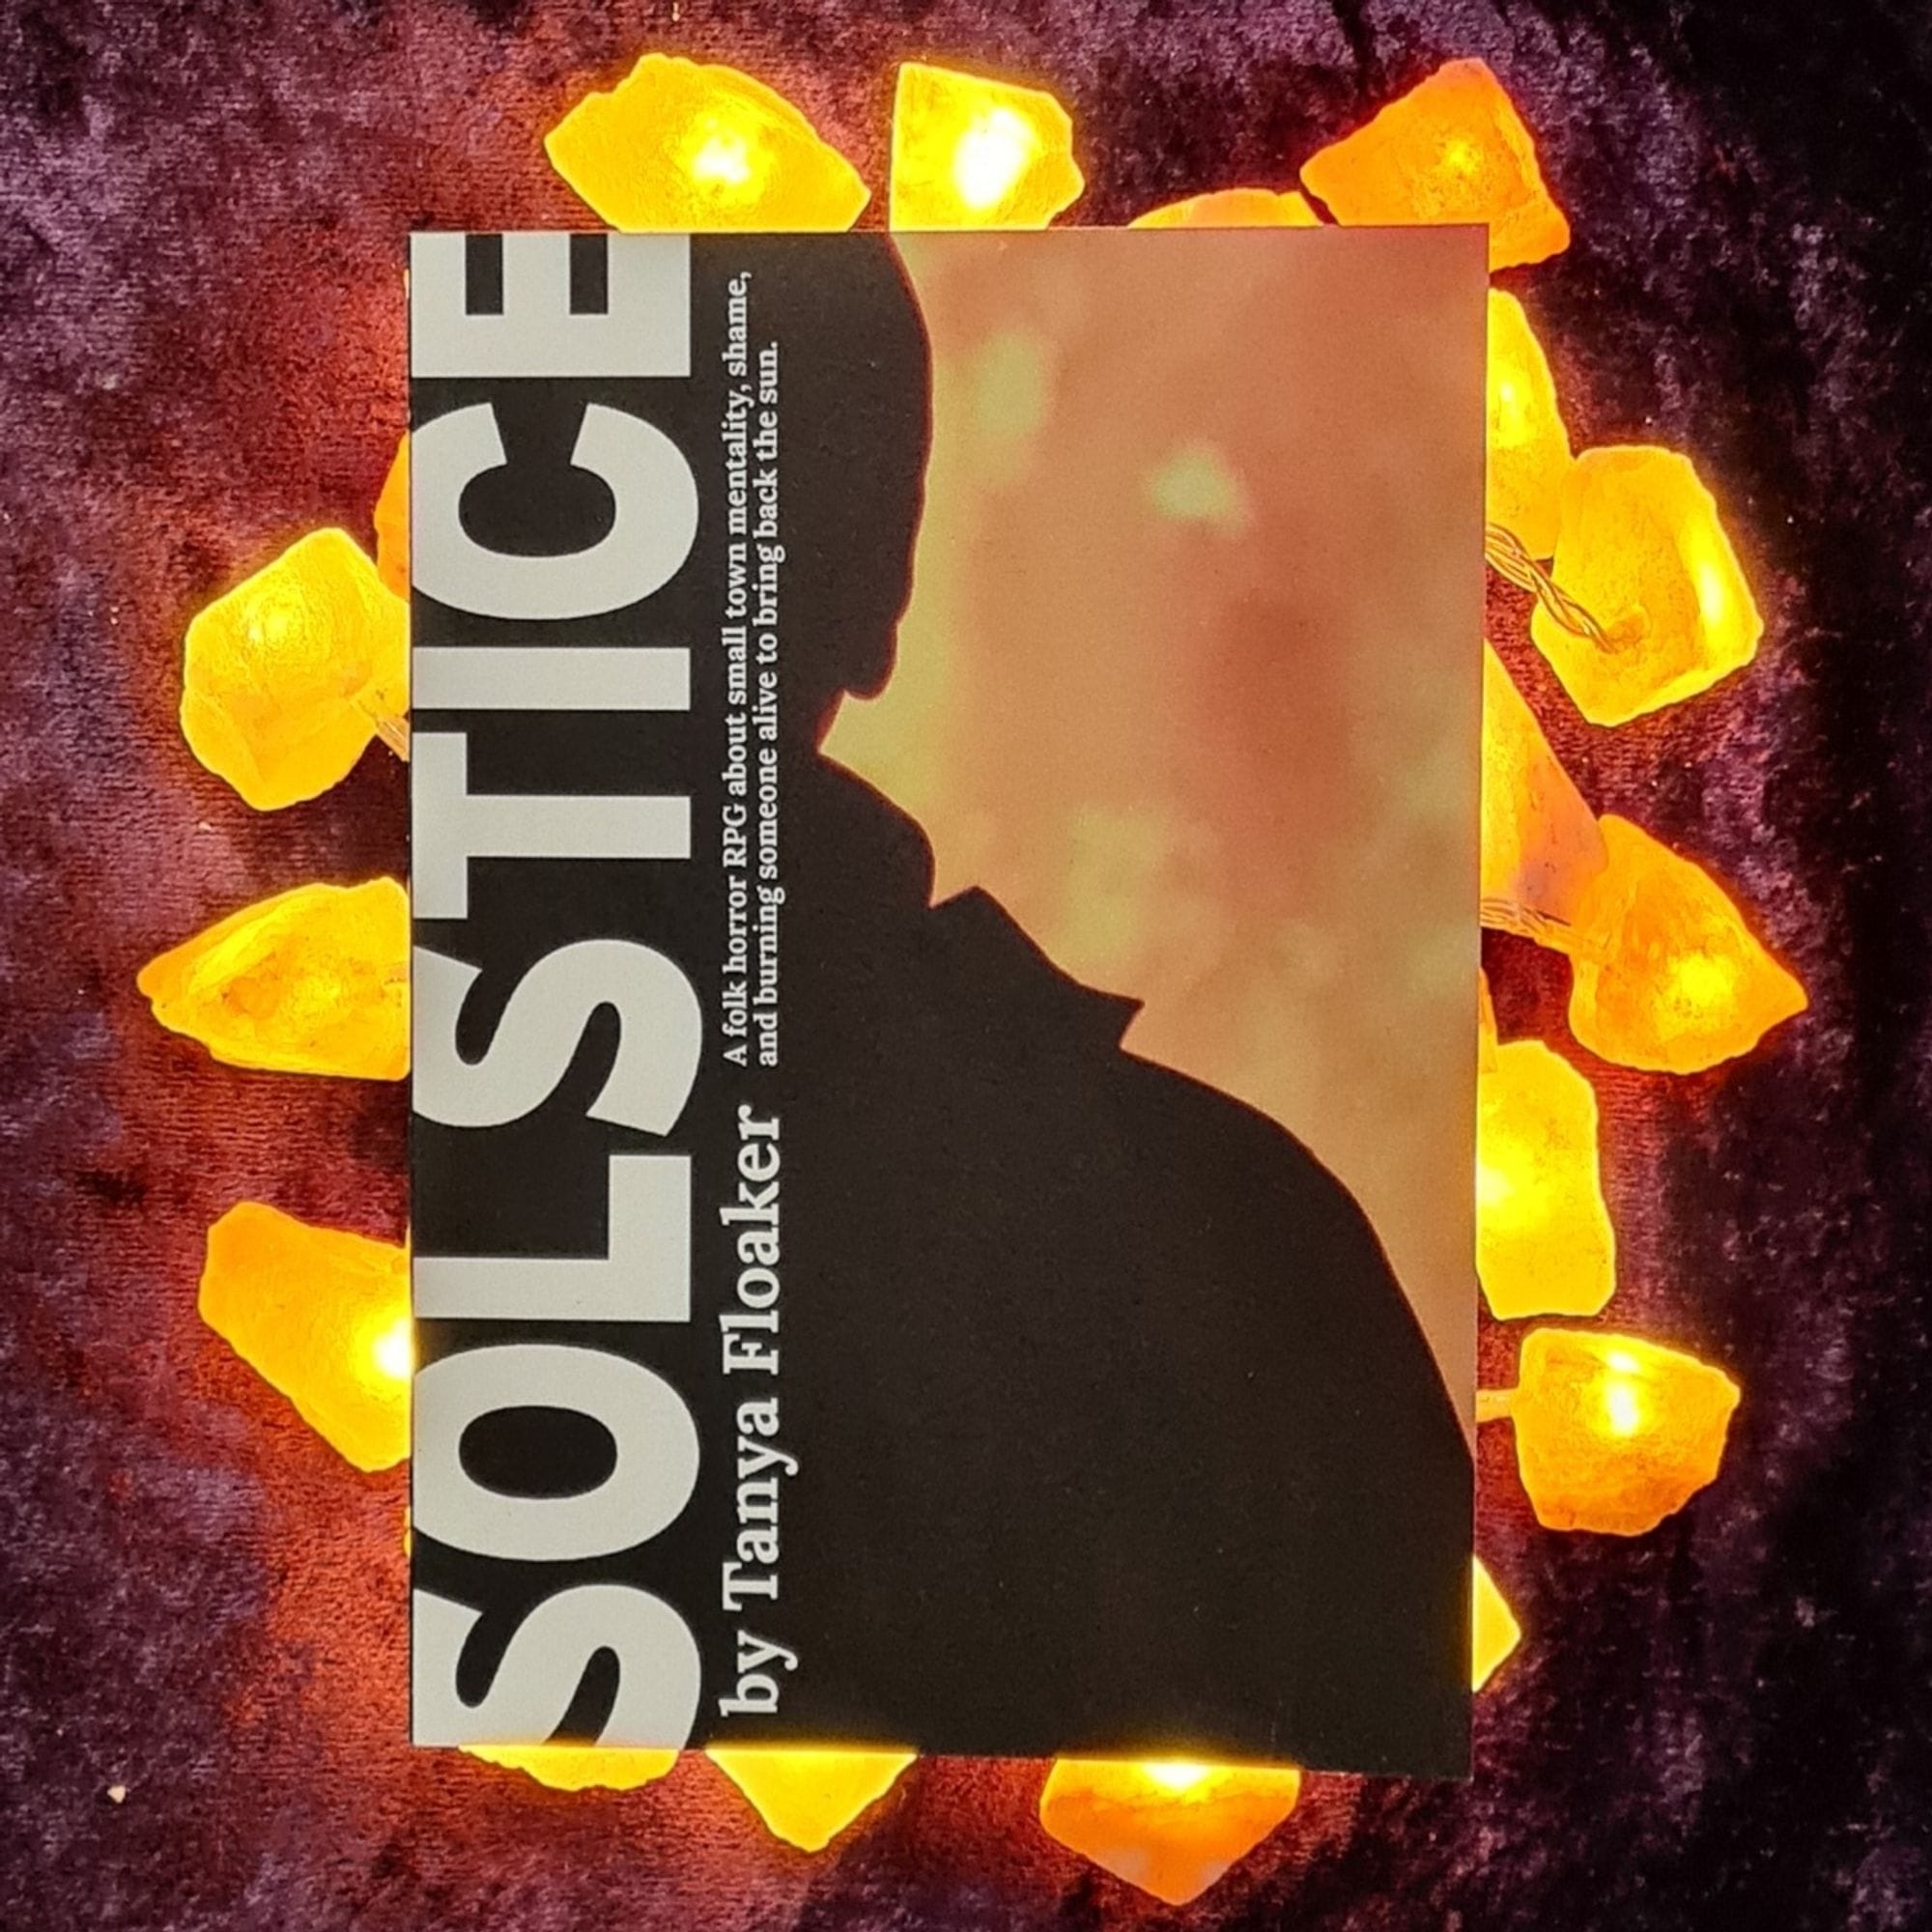 A copy of the Solstice RPG zine sits on top of some amber-glowing rock crystal fairy lights, all sat on a purple velvet cloth. The zine has the half sillouette of a person on cut down the middle on the left-and spine. To their right rages fire. In their sillouette is a banner reading "SOLSTICE / by Tanya Floaker / A folk horror RPG about small town mentality, shame, and burning someone alive to bring back the sun."